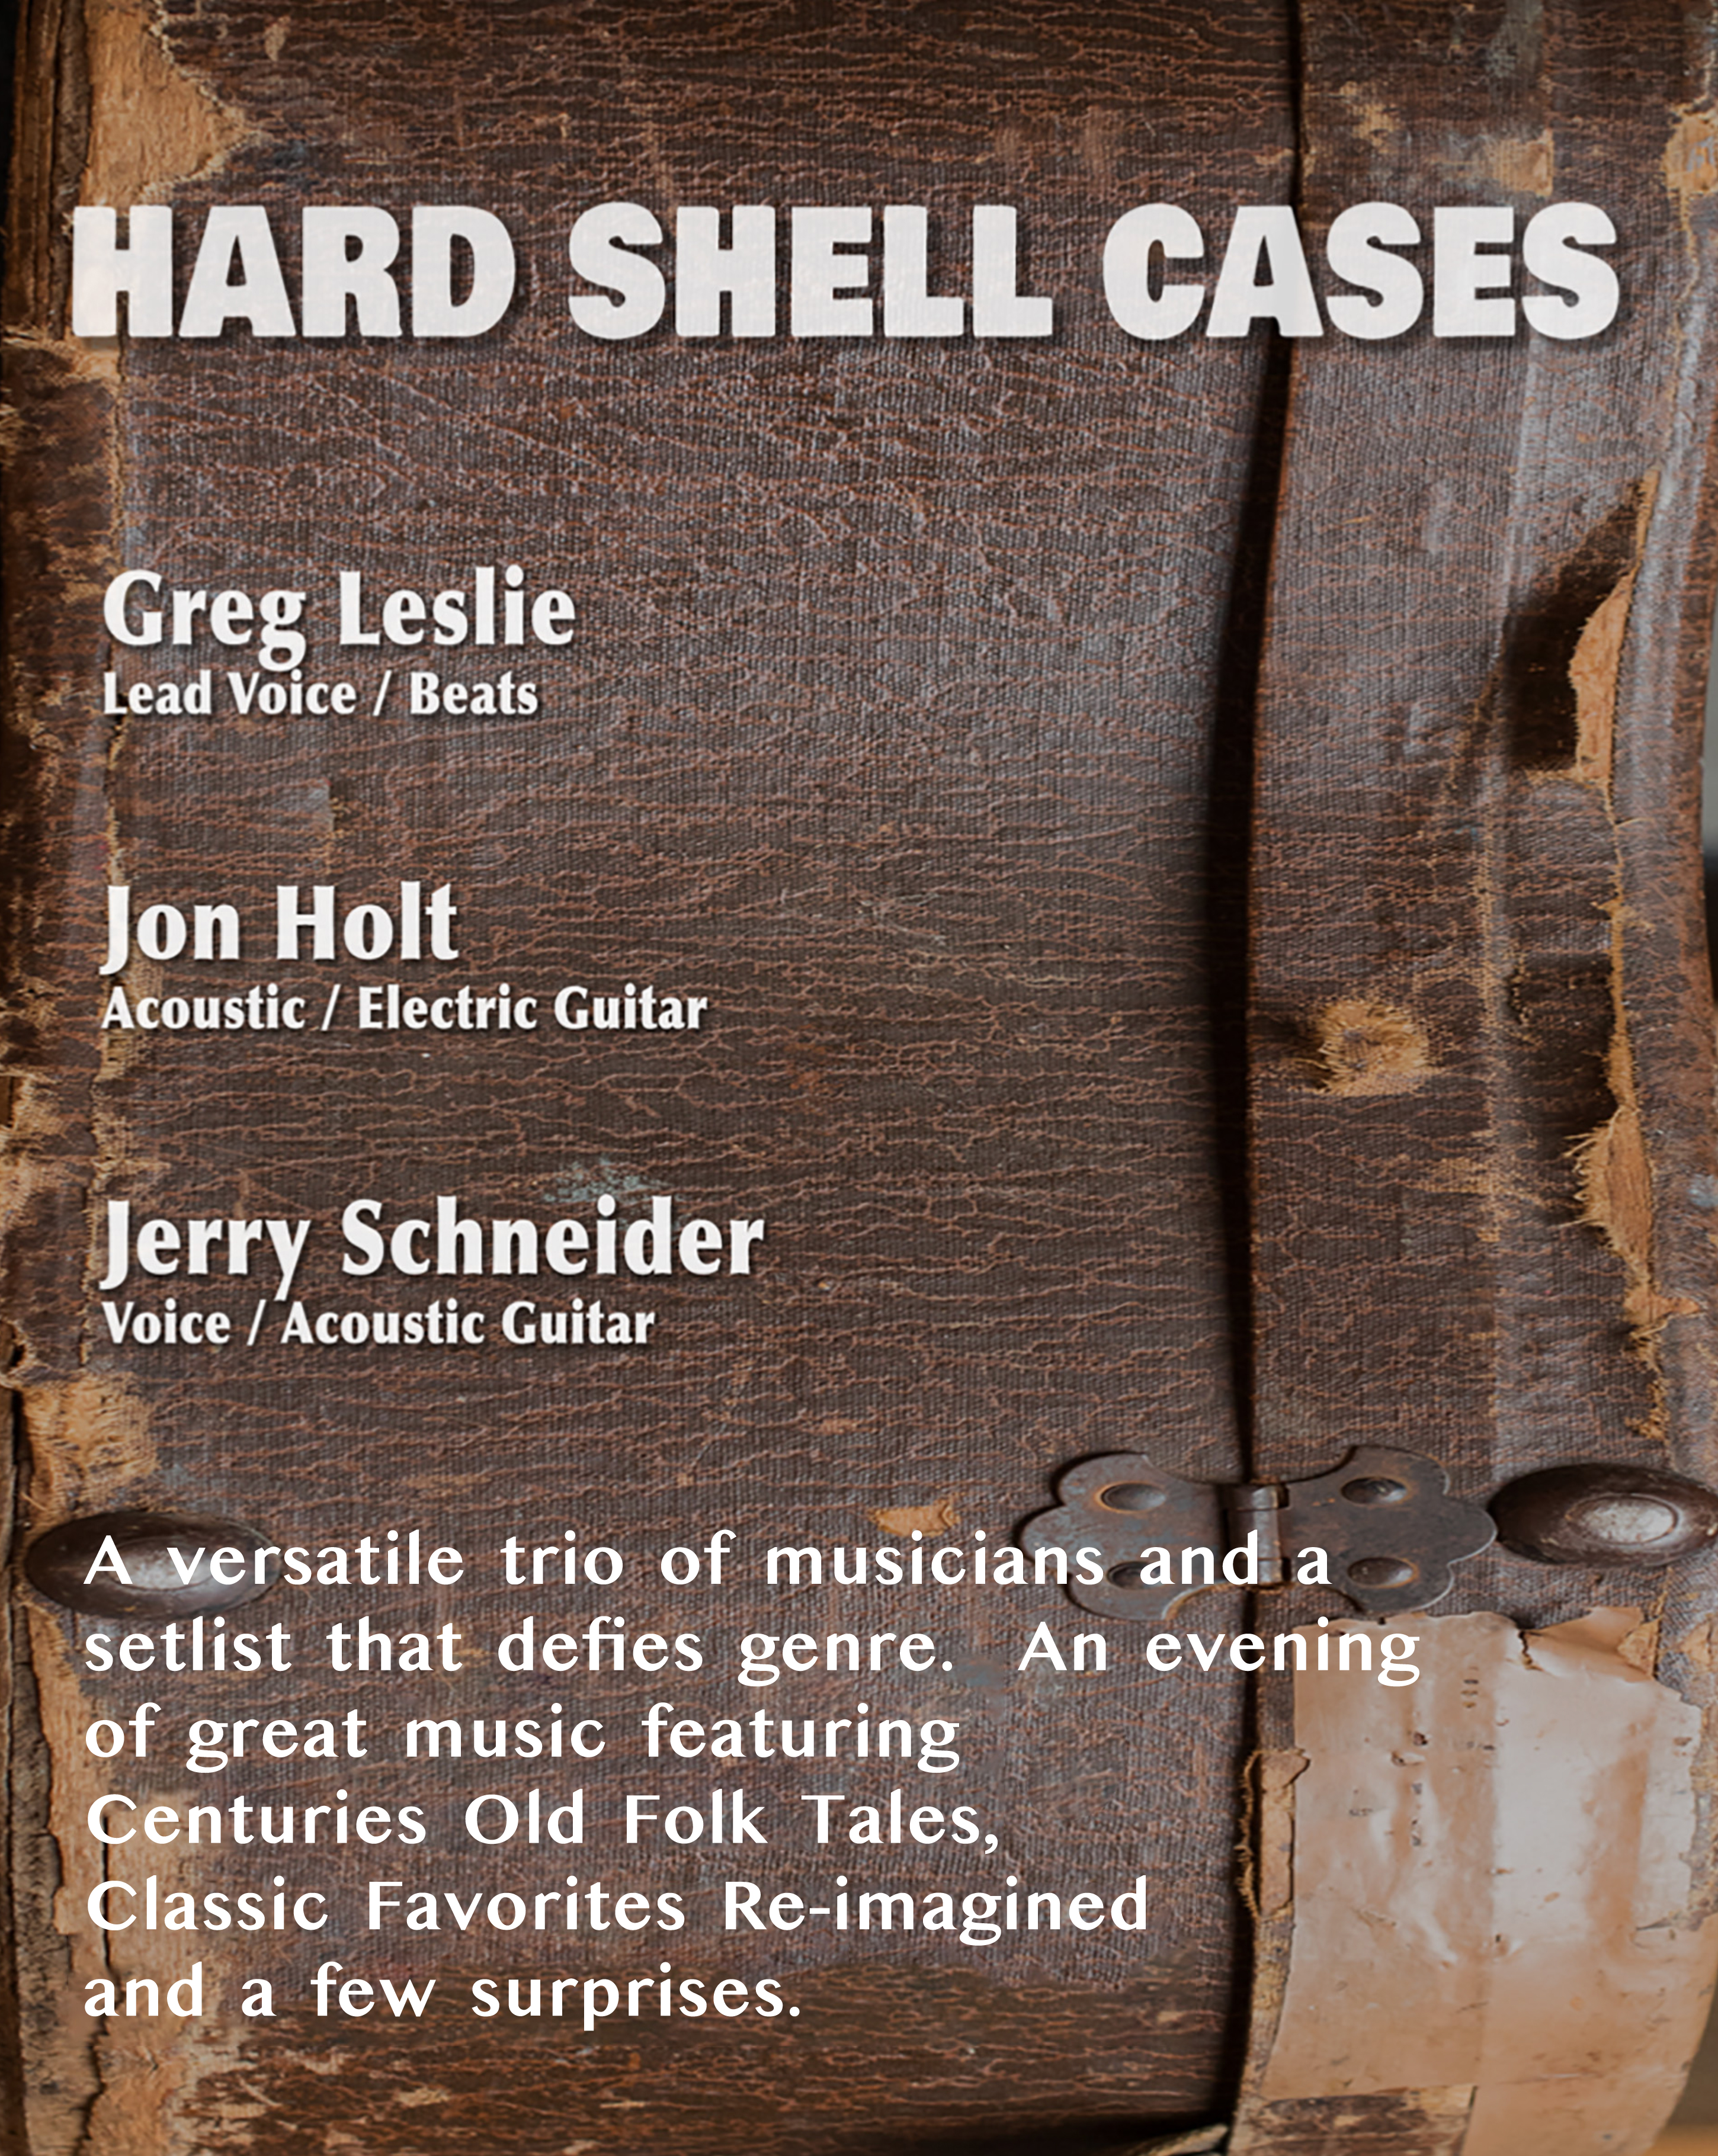 Product Image for 4-05-24 Hard Shell Cases in The Loft on Friday, April 5th from 6:30-8:30pm